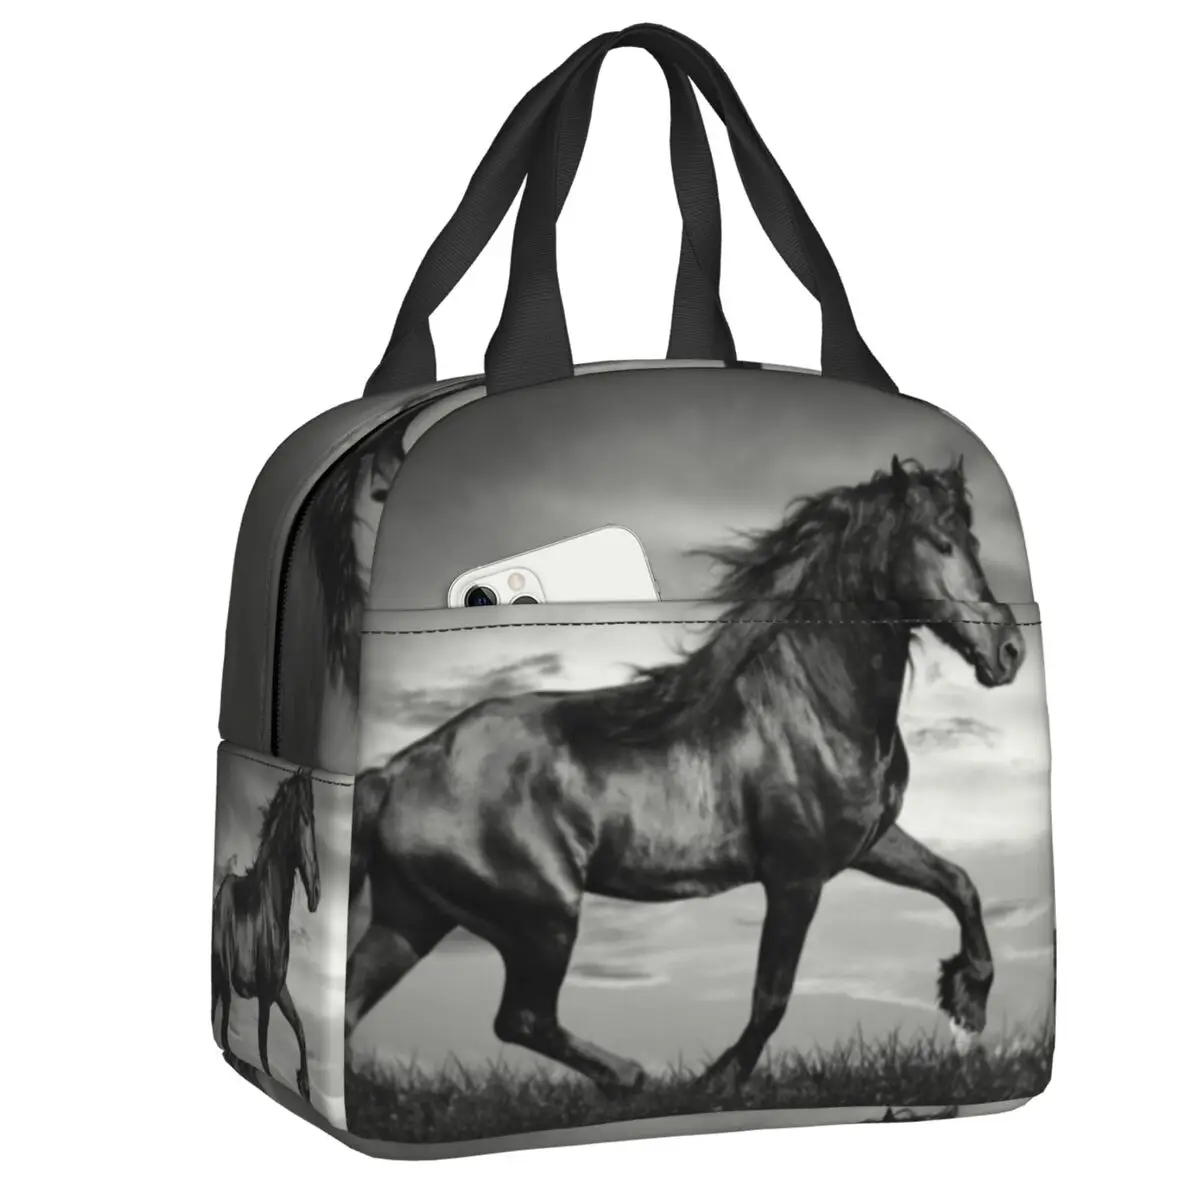 

Black Friesian Stallion Prancing Insulated Lunch Bag Resuable Warm Cooler Thermal Horse Lunch Tote Box for Women Kids School